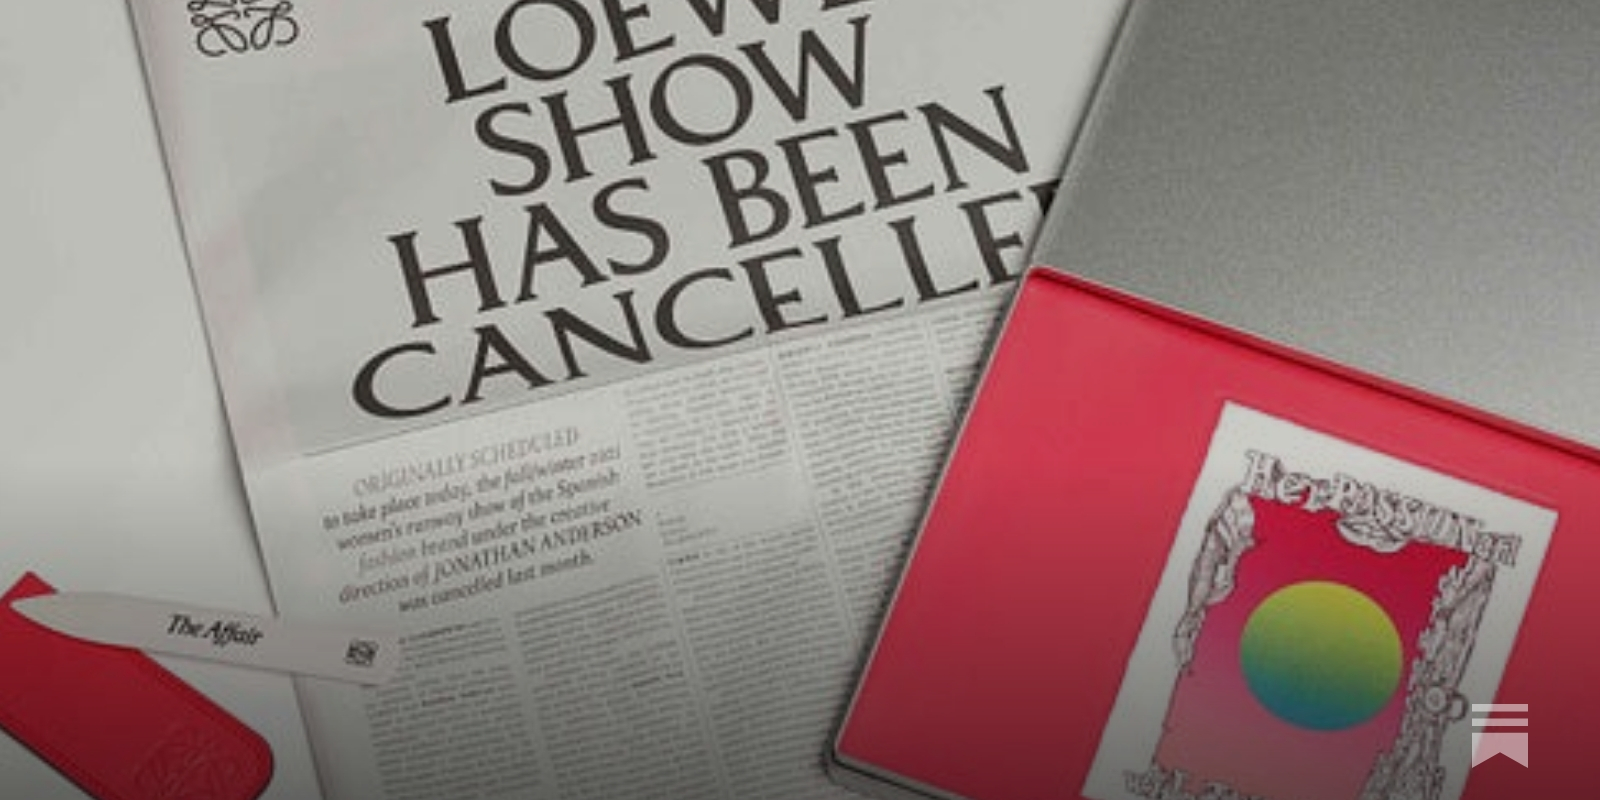 Loewe Turns a Content-Commerce Page With A Show in the News